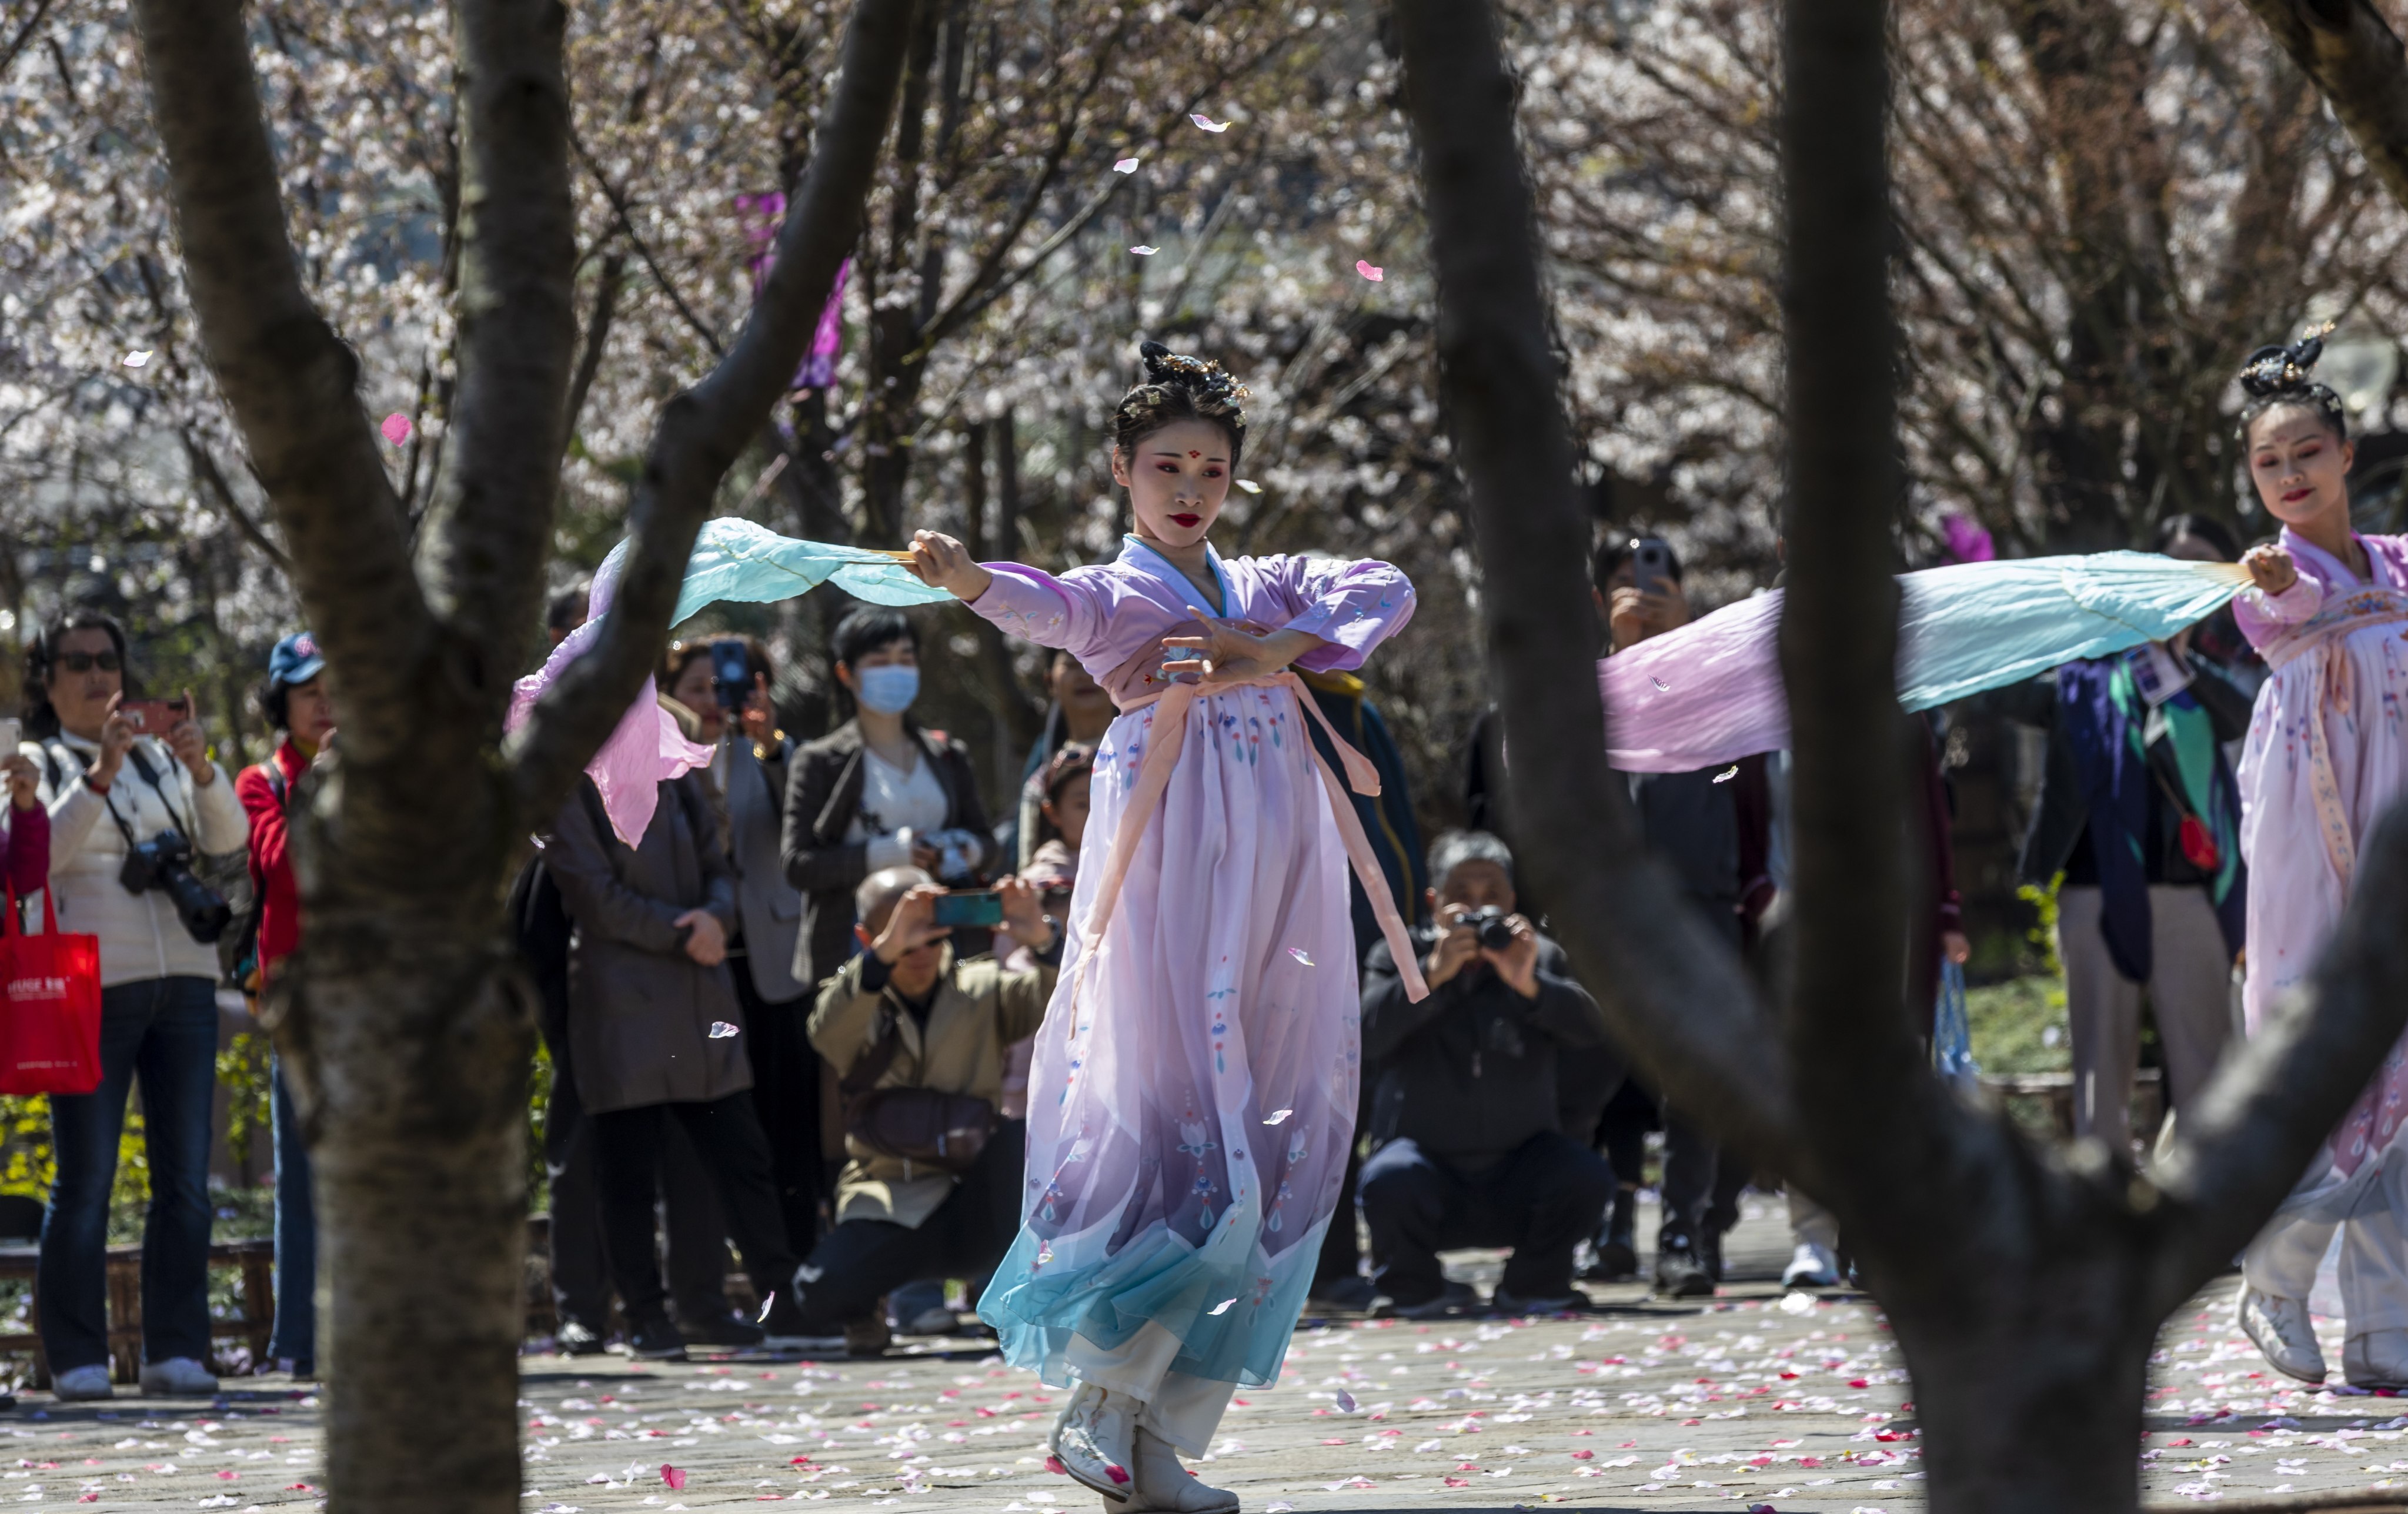 Women in traditional Chinese Hanfu attire dance for visitors to celebrate the Cherry Blossoms Festival in Nianhuawan, a town near Wuxi city, Jiangsu province, on March 22, 2021. Photo: EPA-EFE